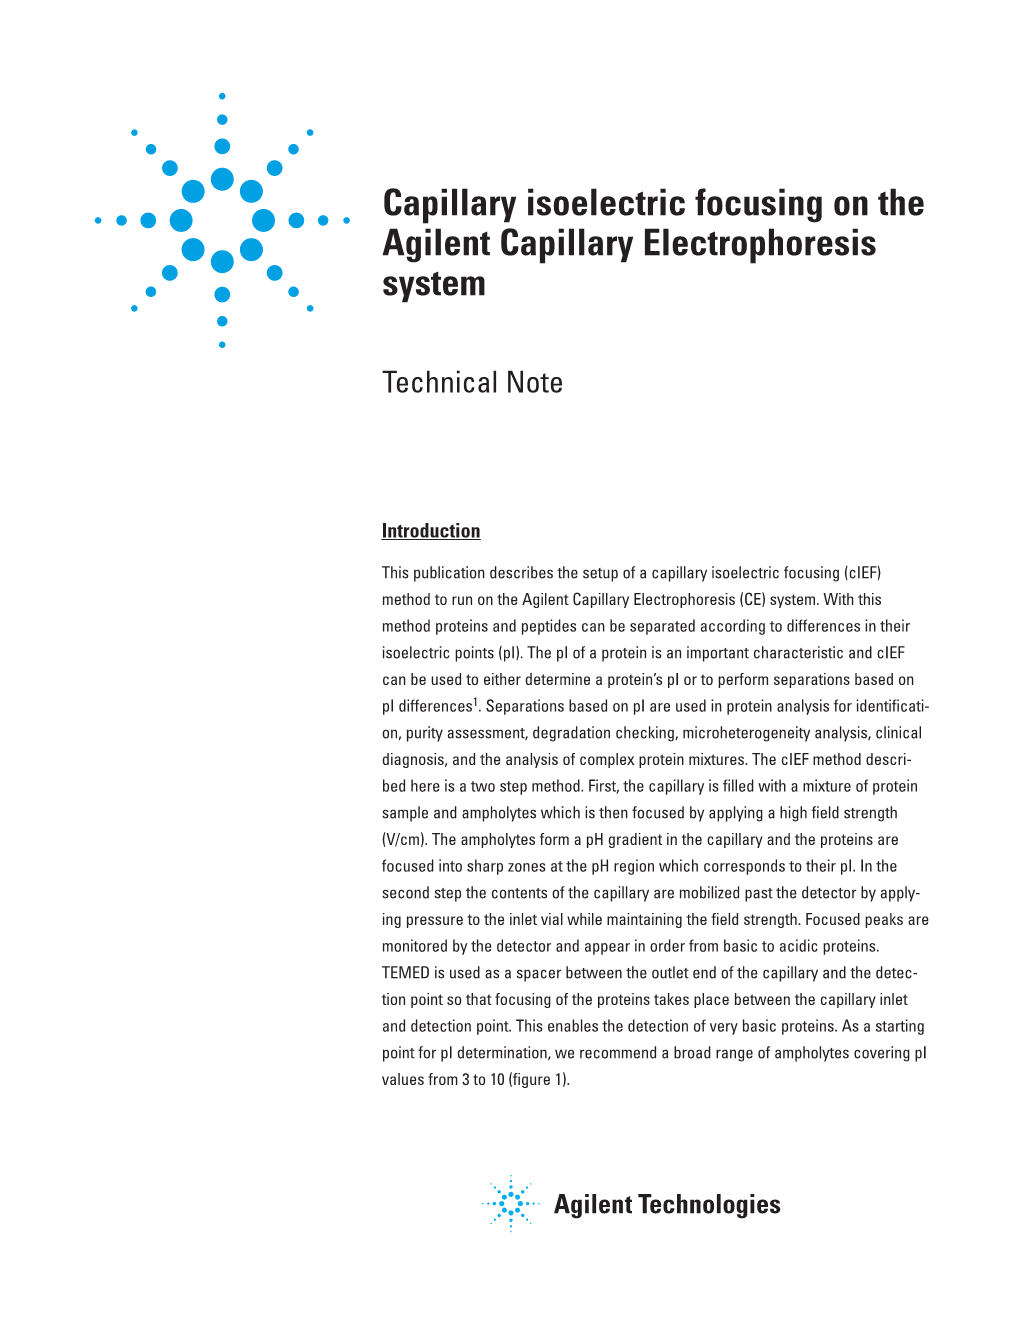 Capillary Isoelectric Focusing on the Agilent Capillary Electrophoresis System